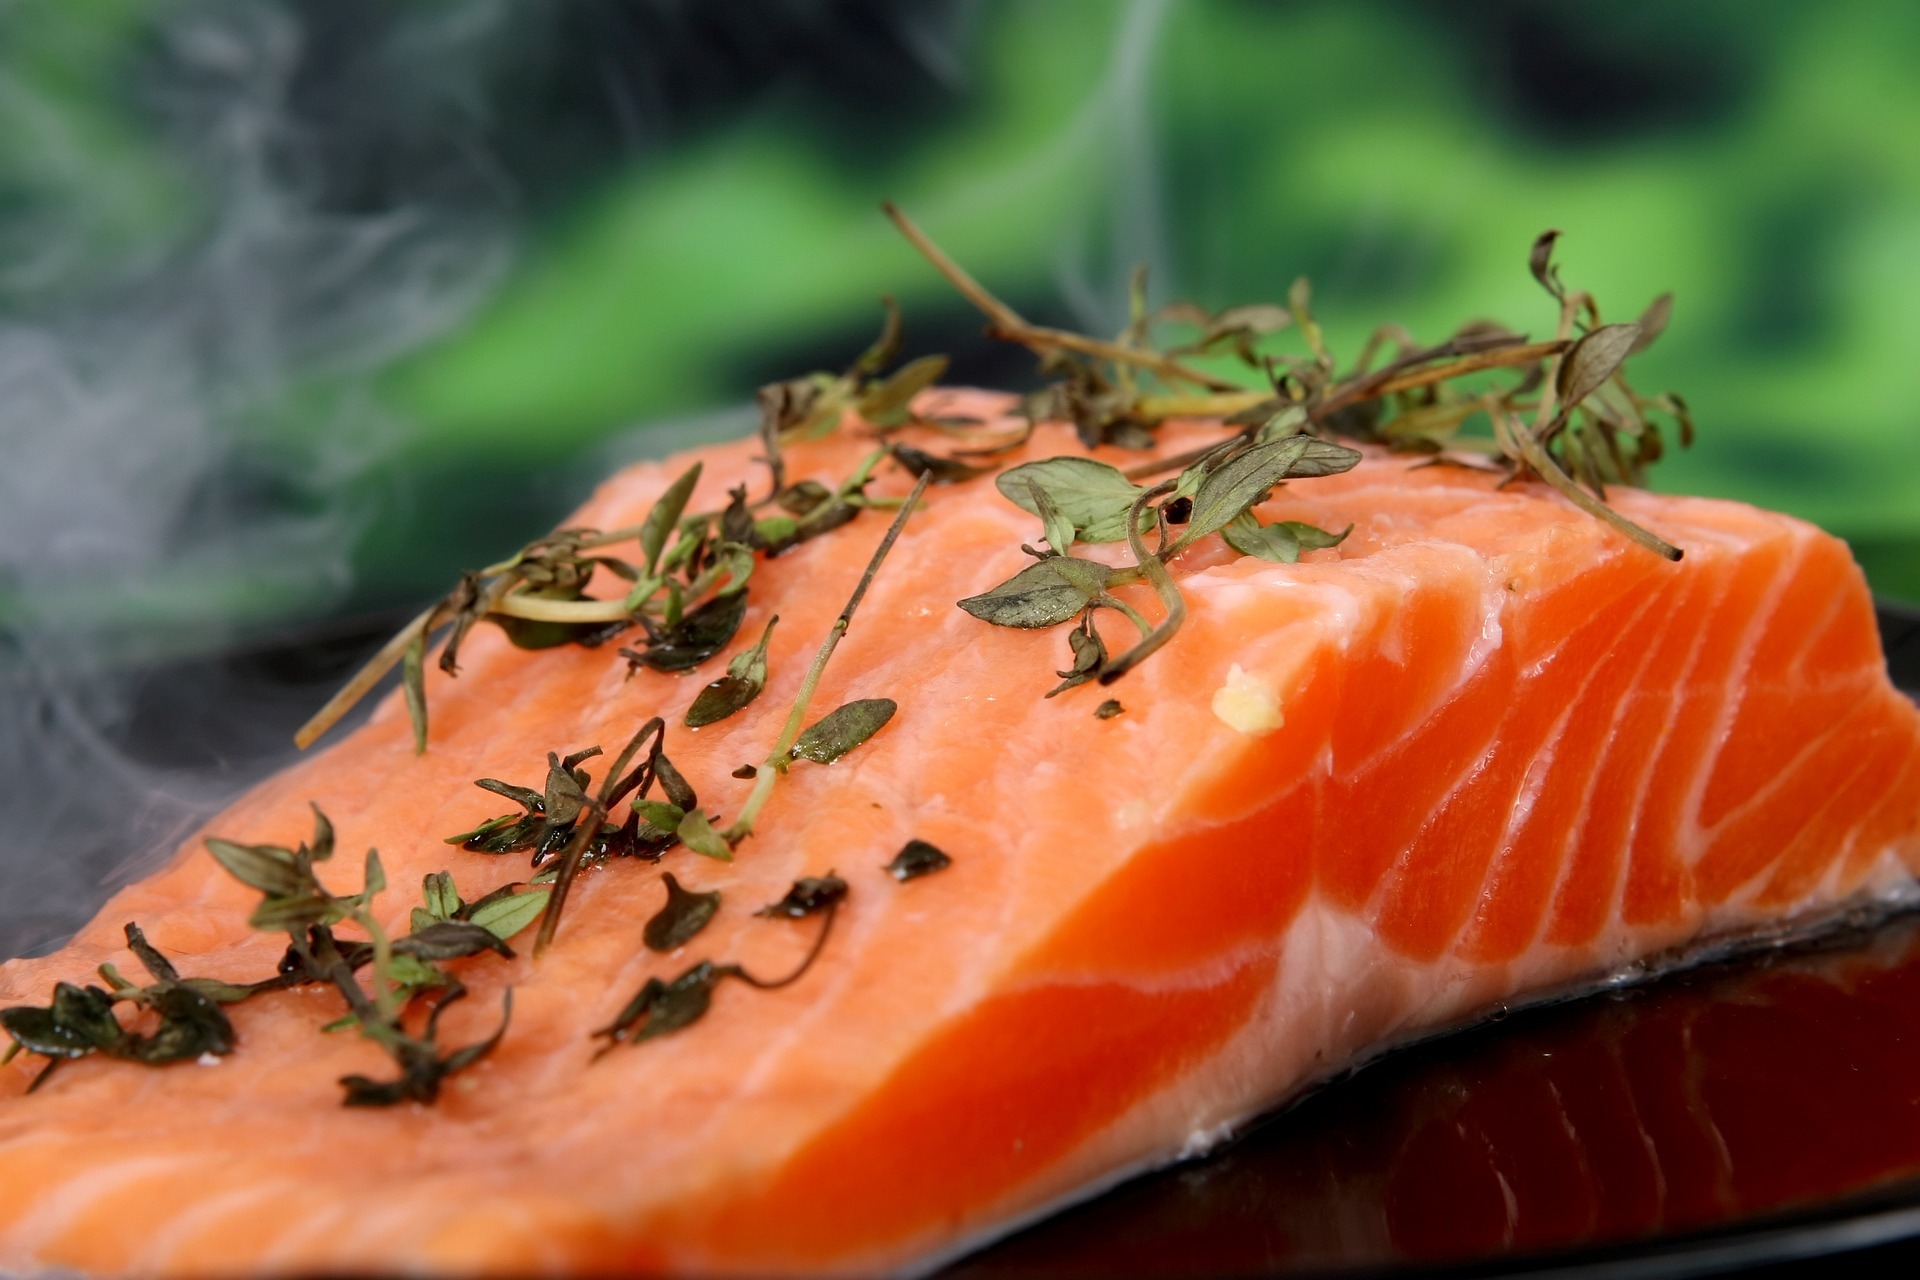 What are the main benefits of Omega-3?